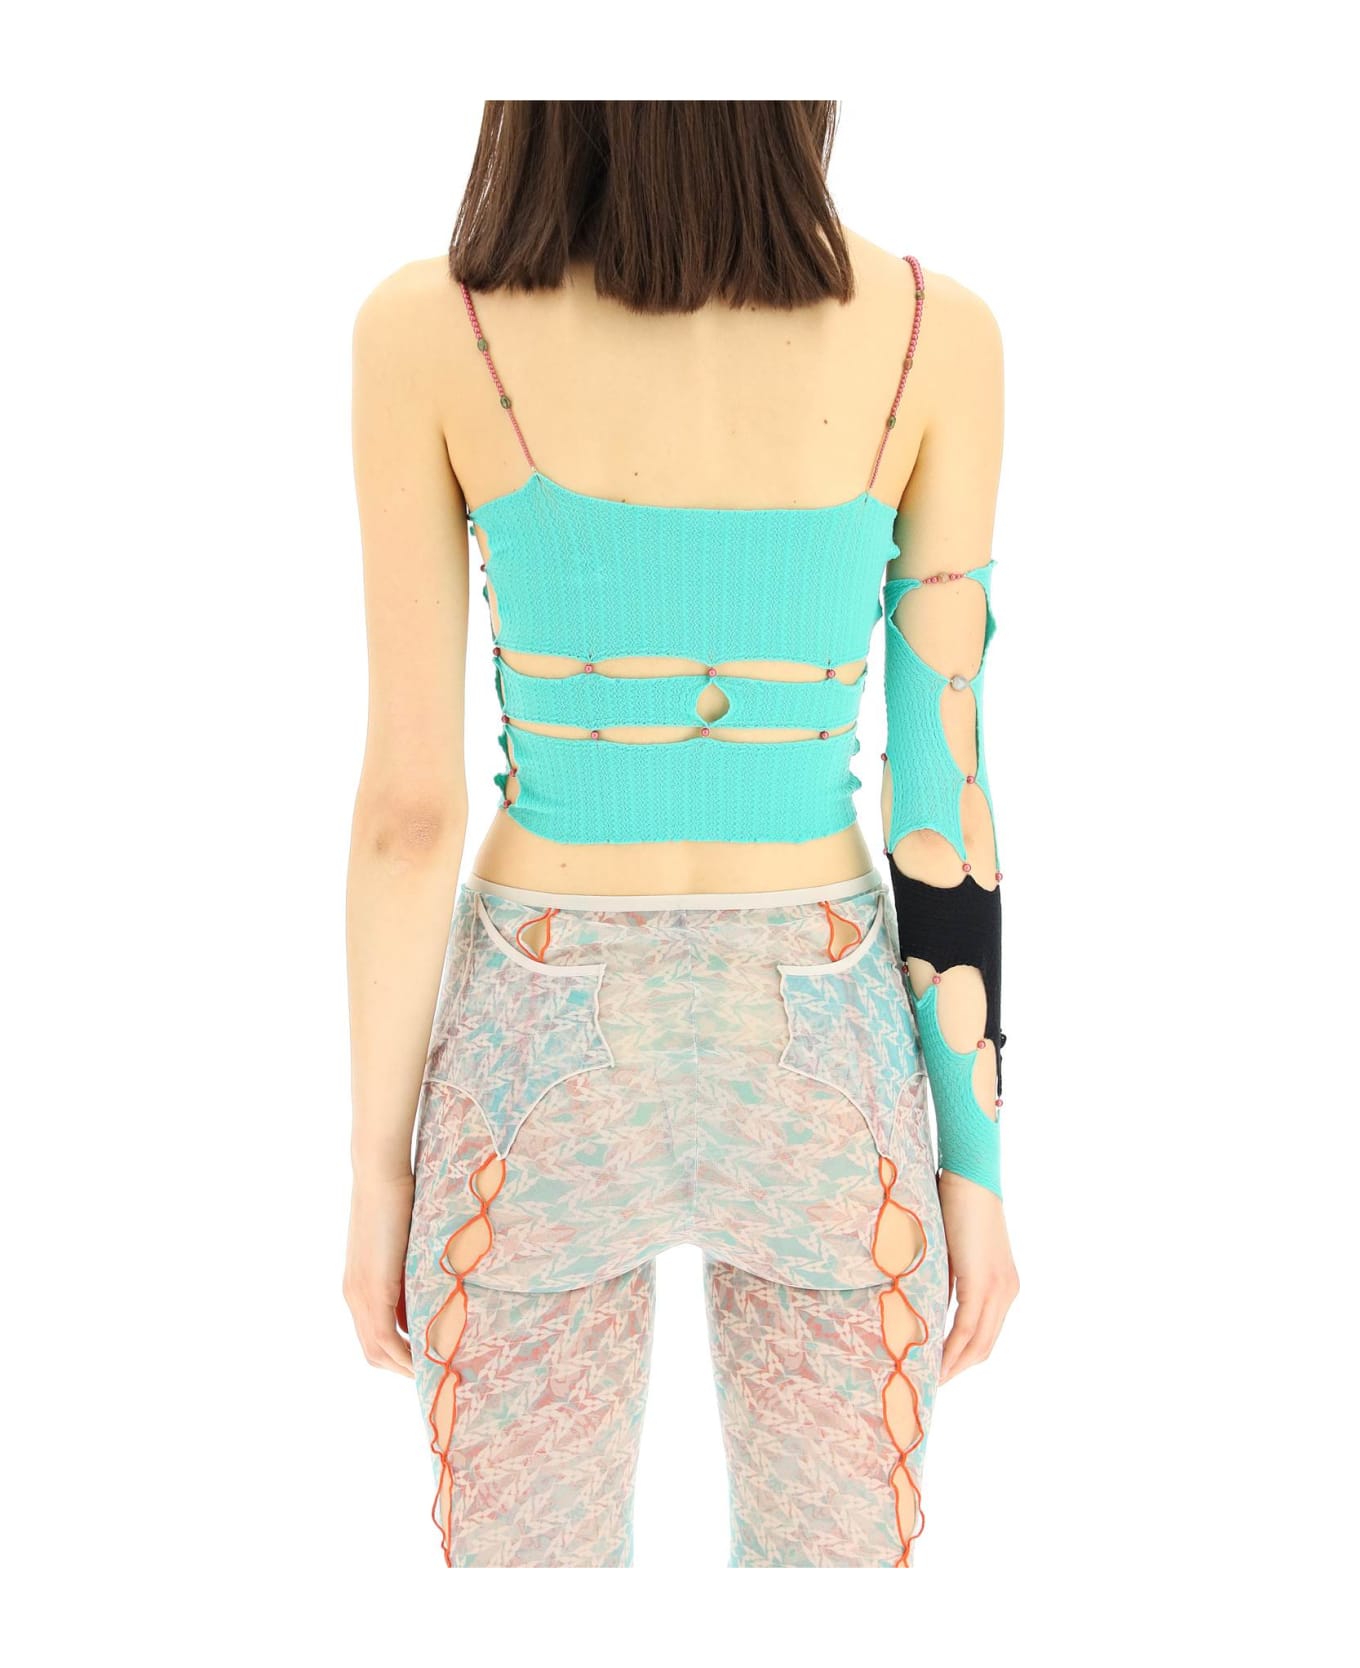 Rui Knit Sleeve With Cut-out And Beads - SEAFOAM ONYX (Green) タンクトップ